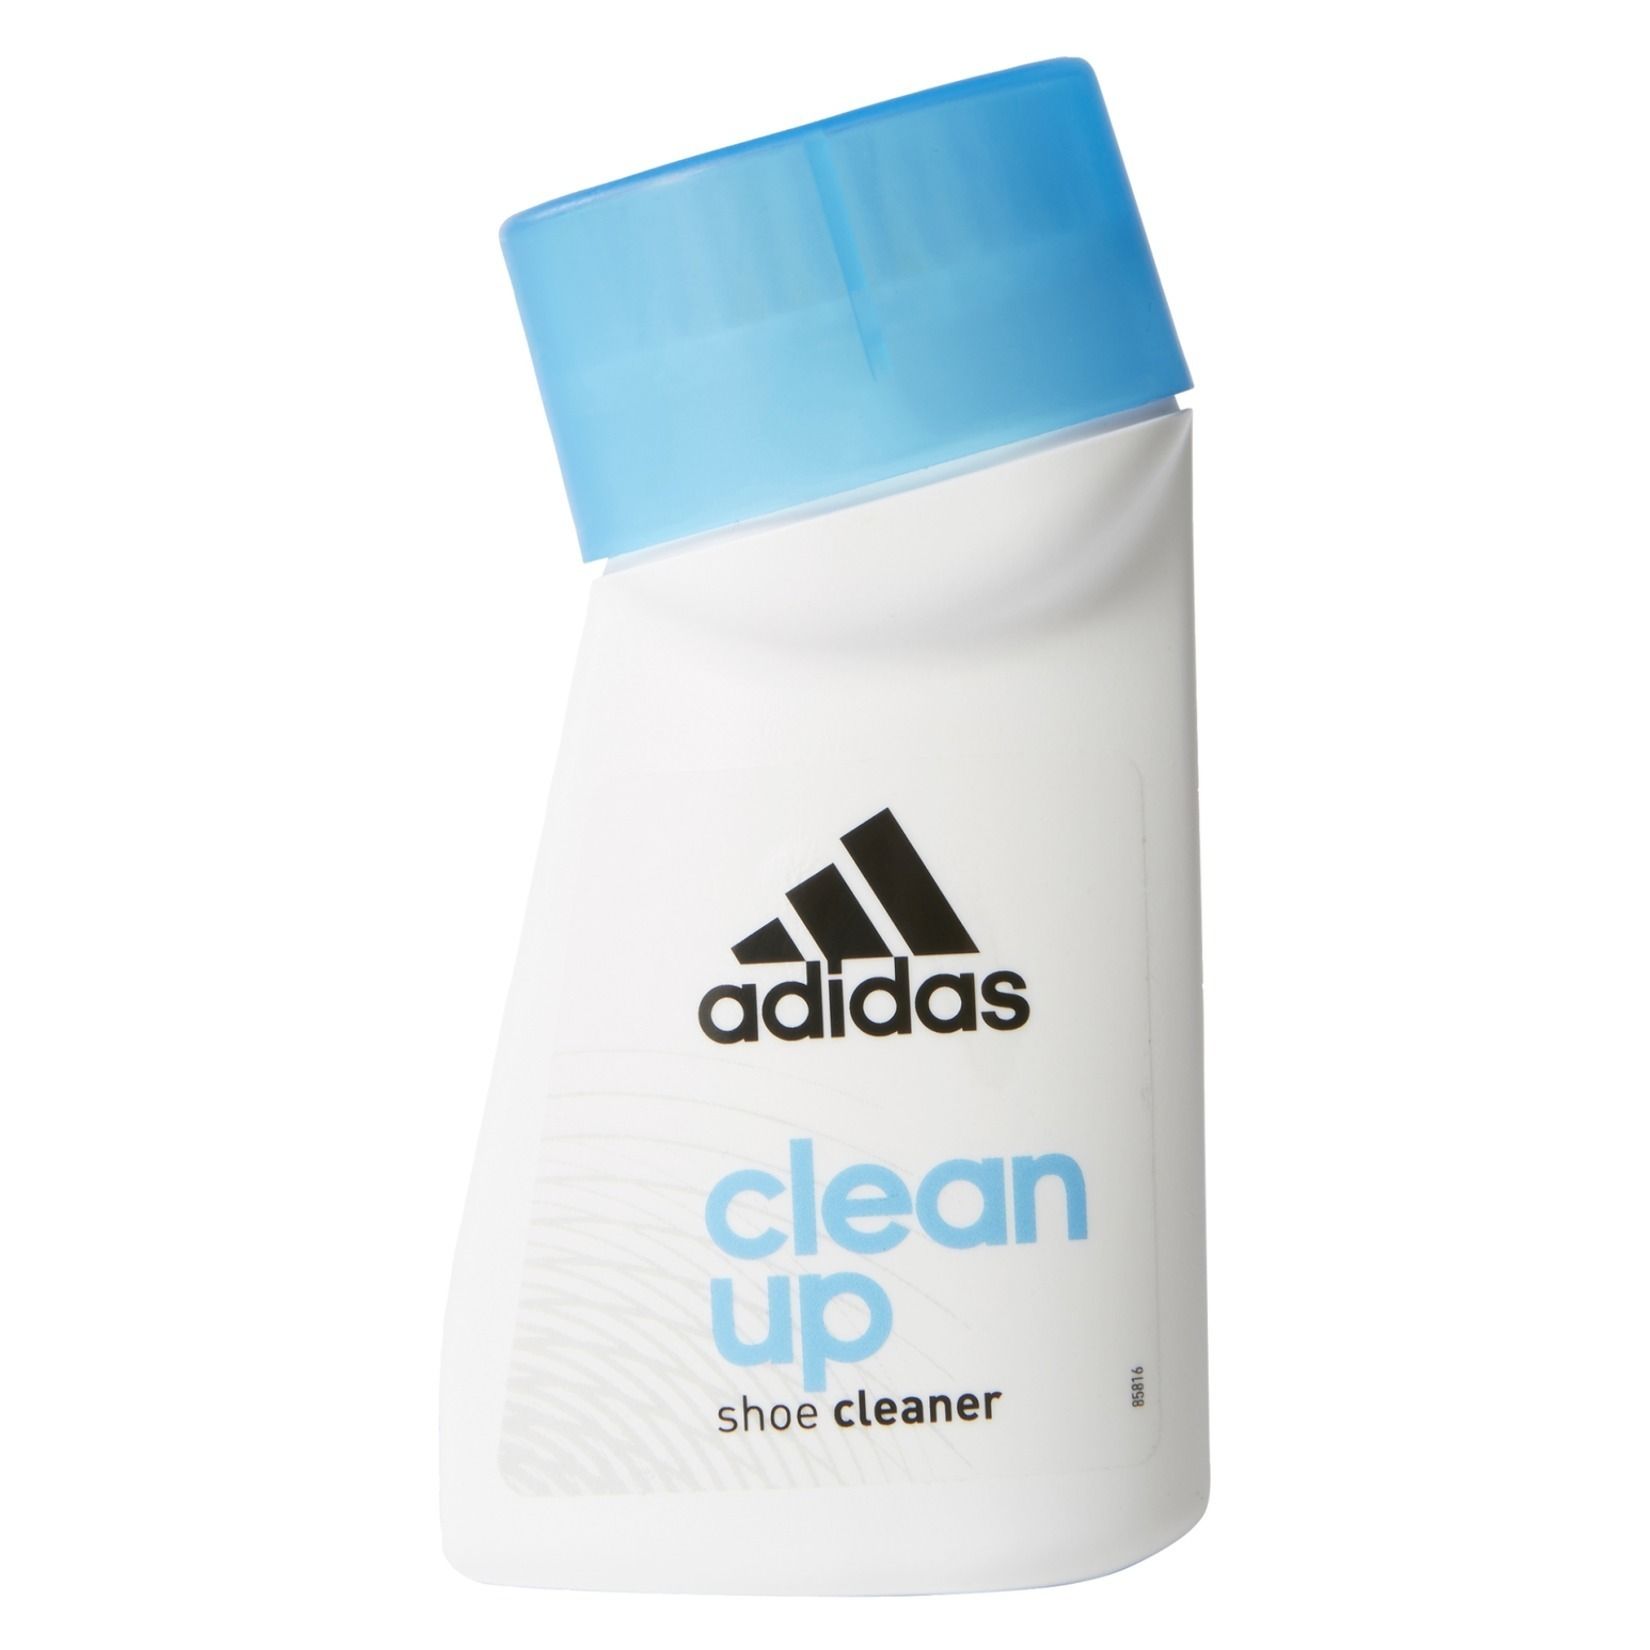 adidas clean up shoe cleaner